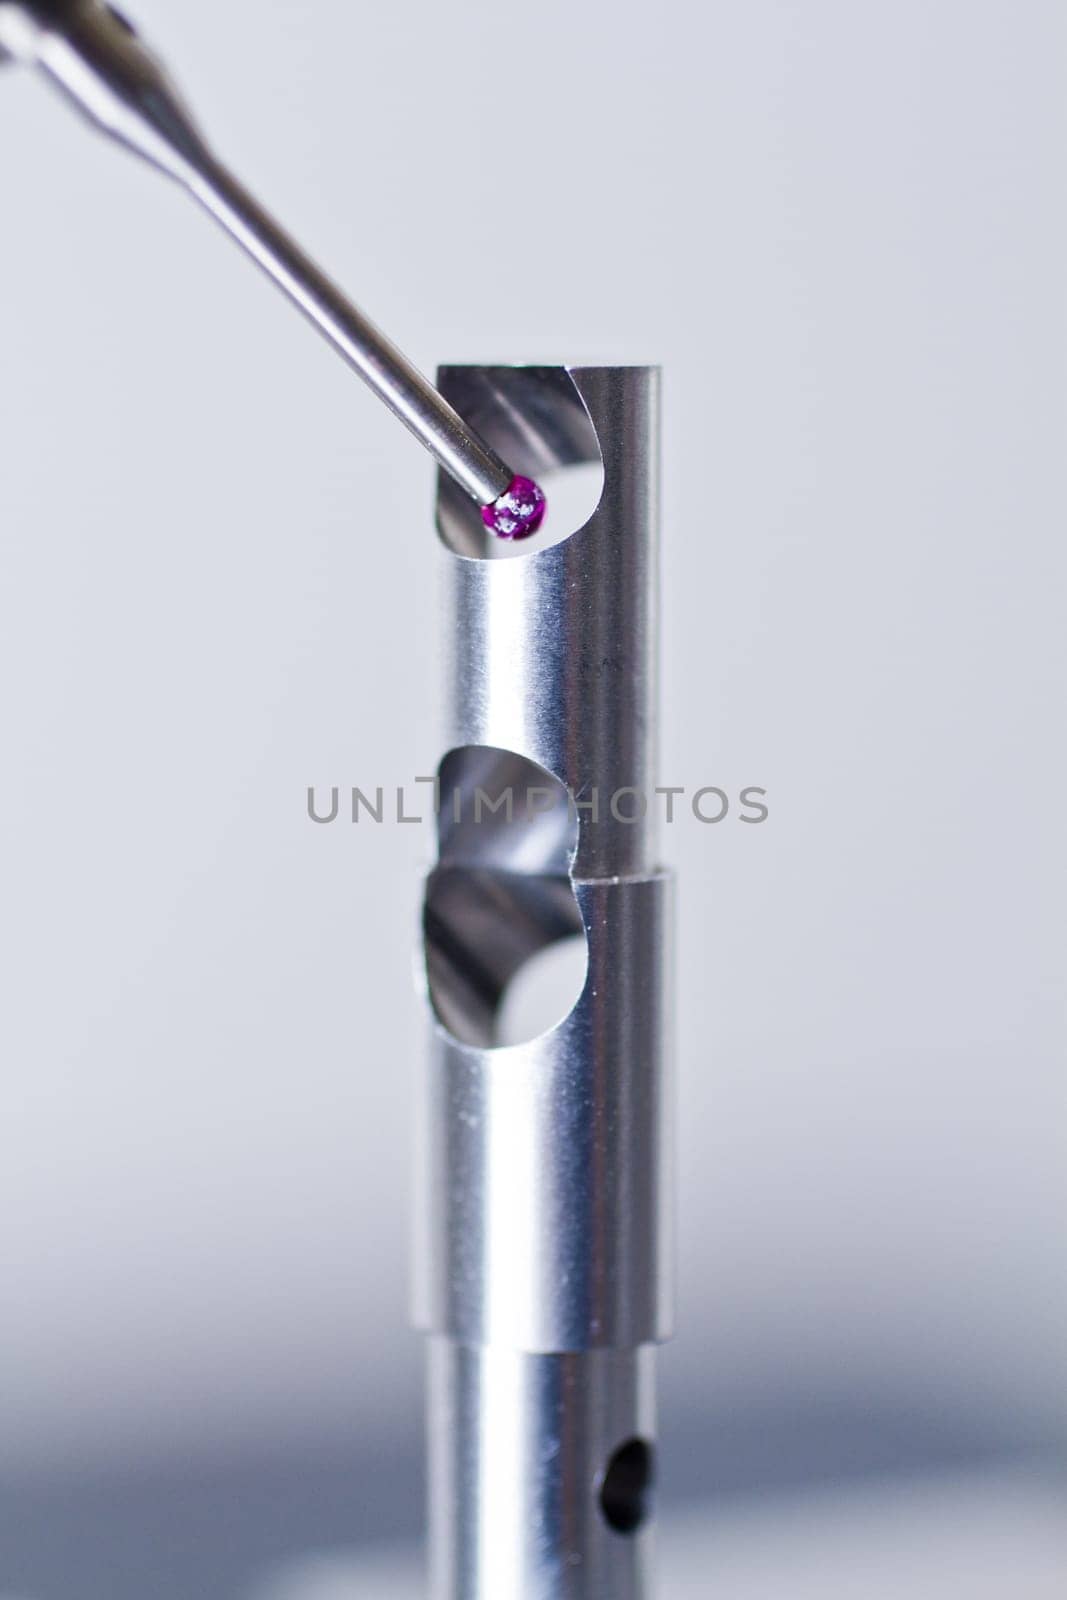 Pink probe of CMM checks metal part with actue precision for faults and flaws.